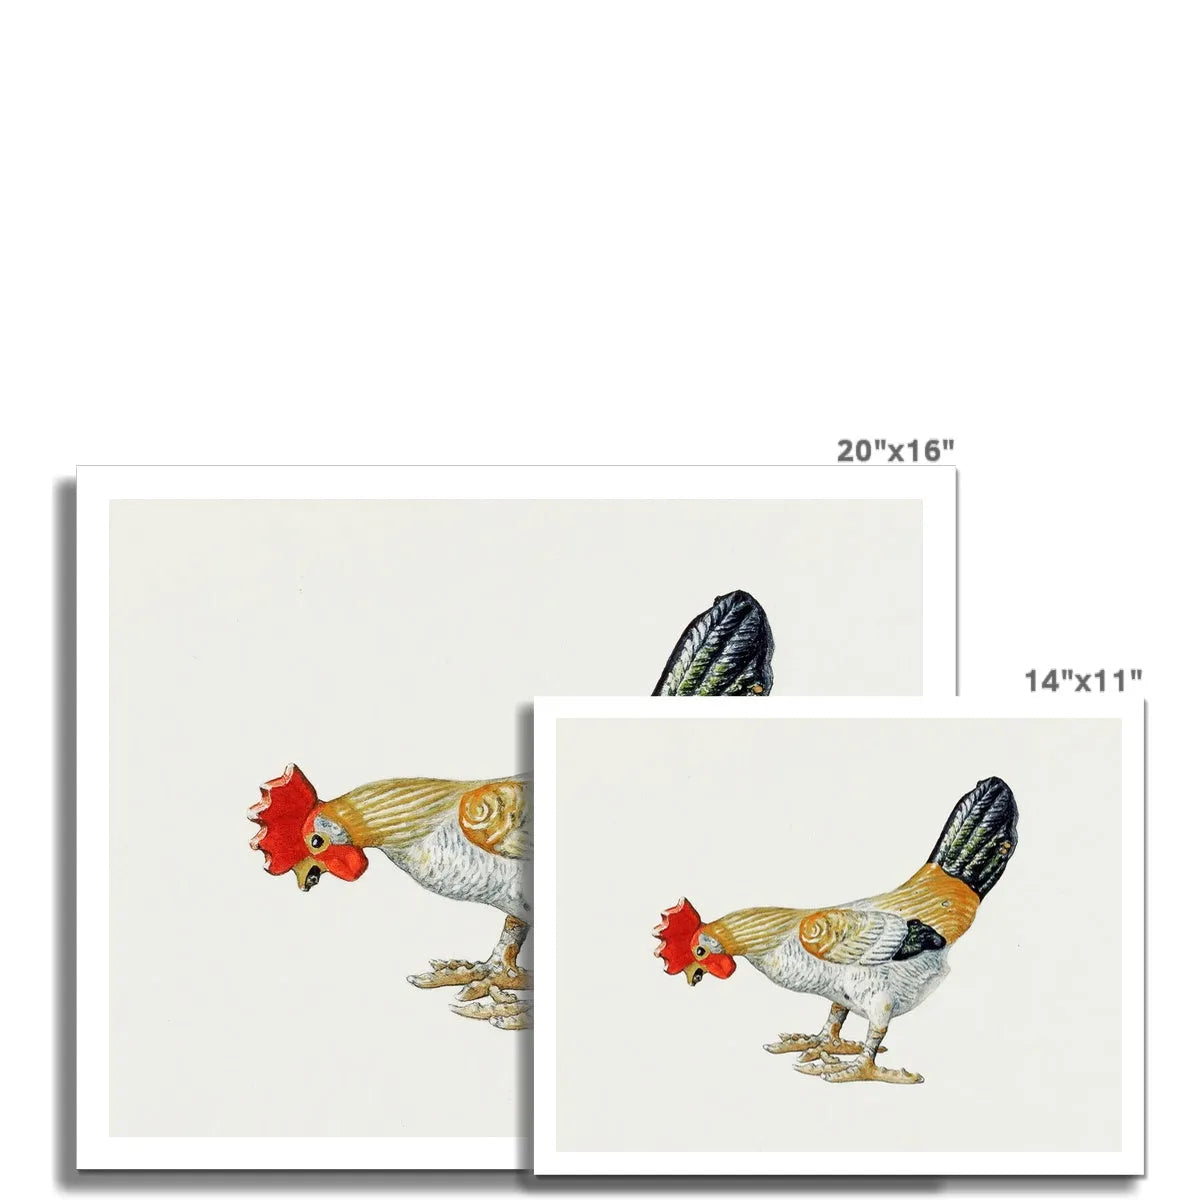 Toy Rooster By Lillian Hunter Fine Art Print - Posters Prints & Visual Artwork - Aesthetic Art